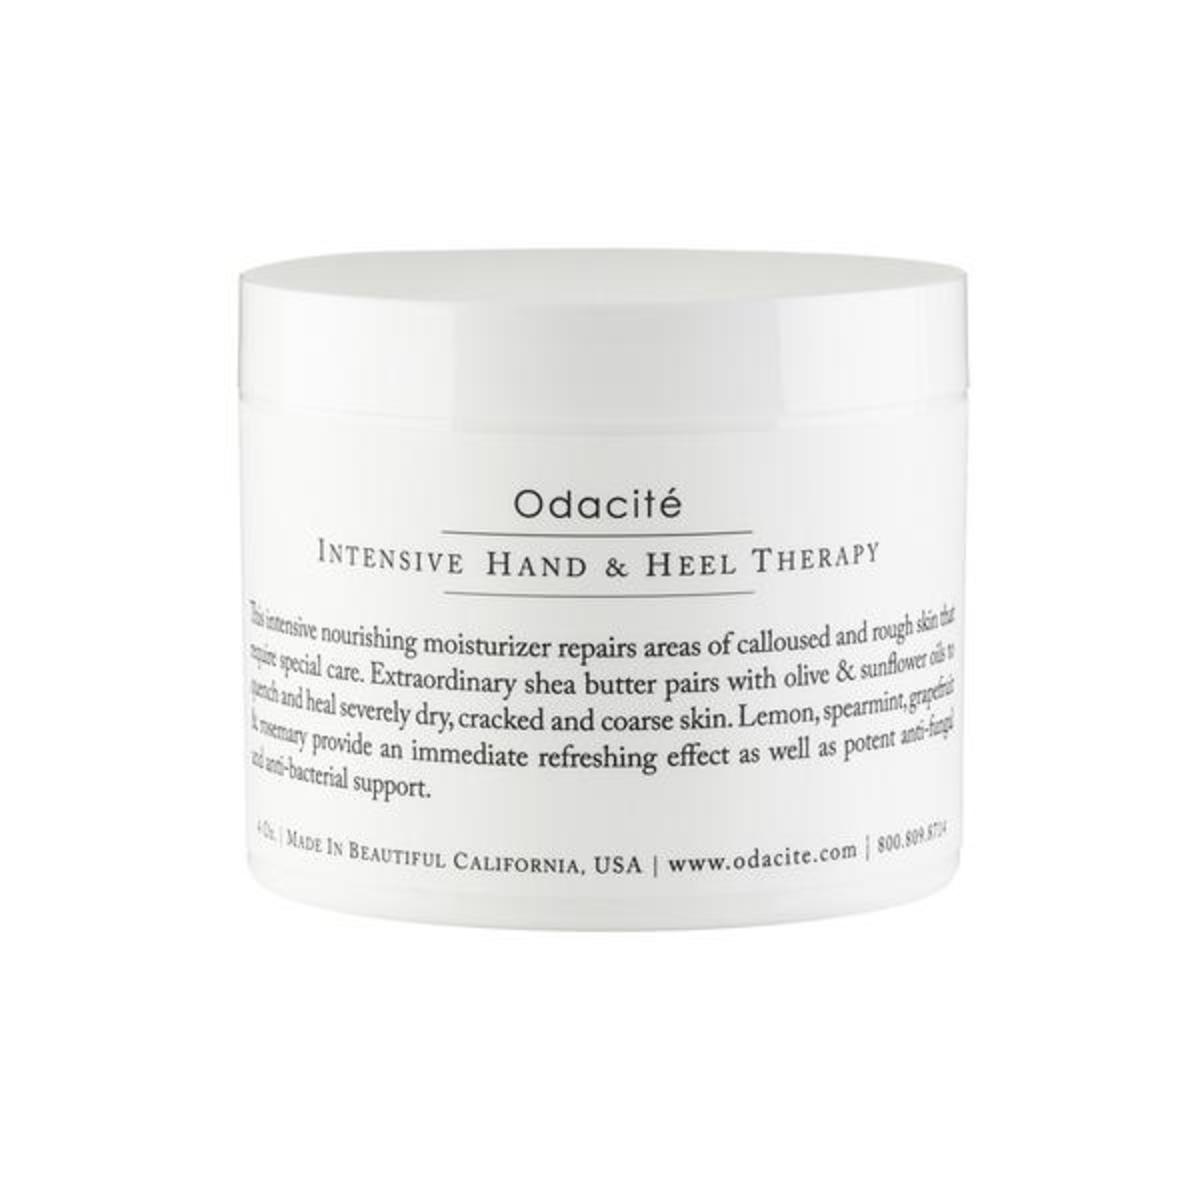 Odacite Intensive Hand and Heel Therapy